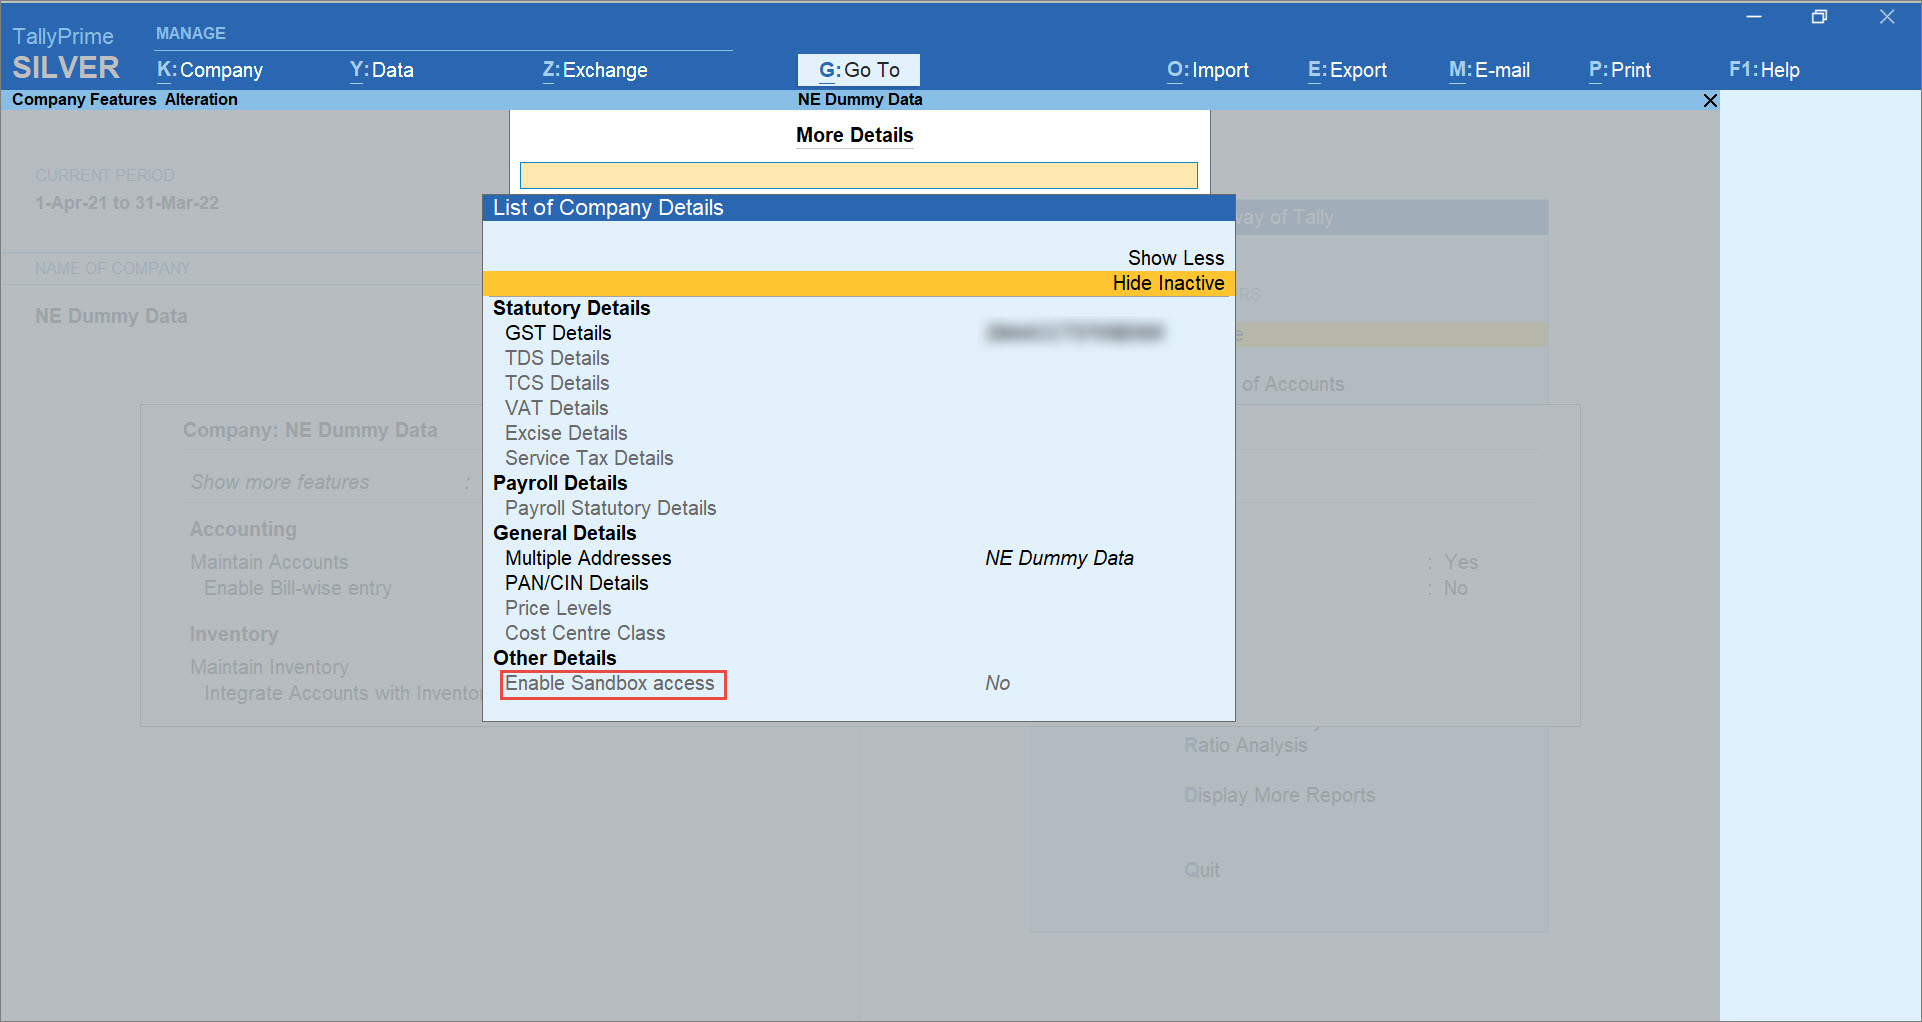 Screen for Enabling Sandbox Access Under More Details of the Company Features in TallyPrime